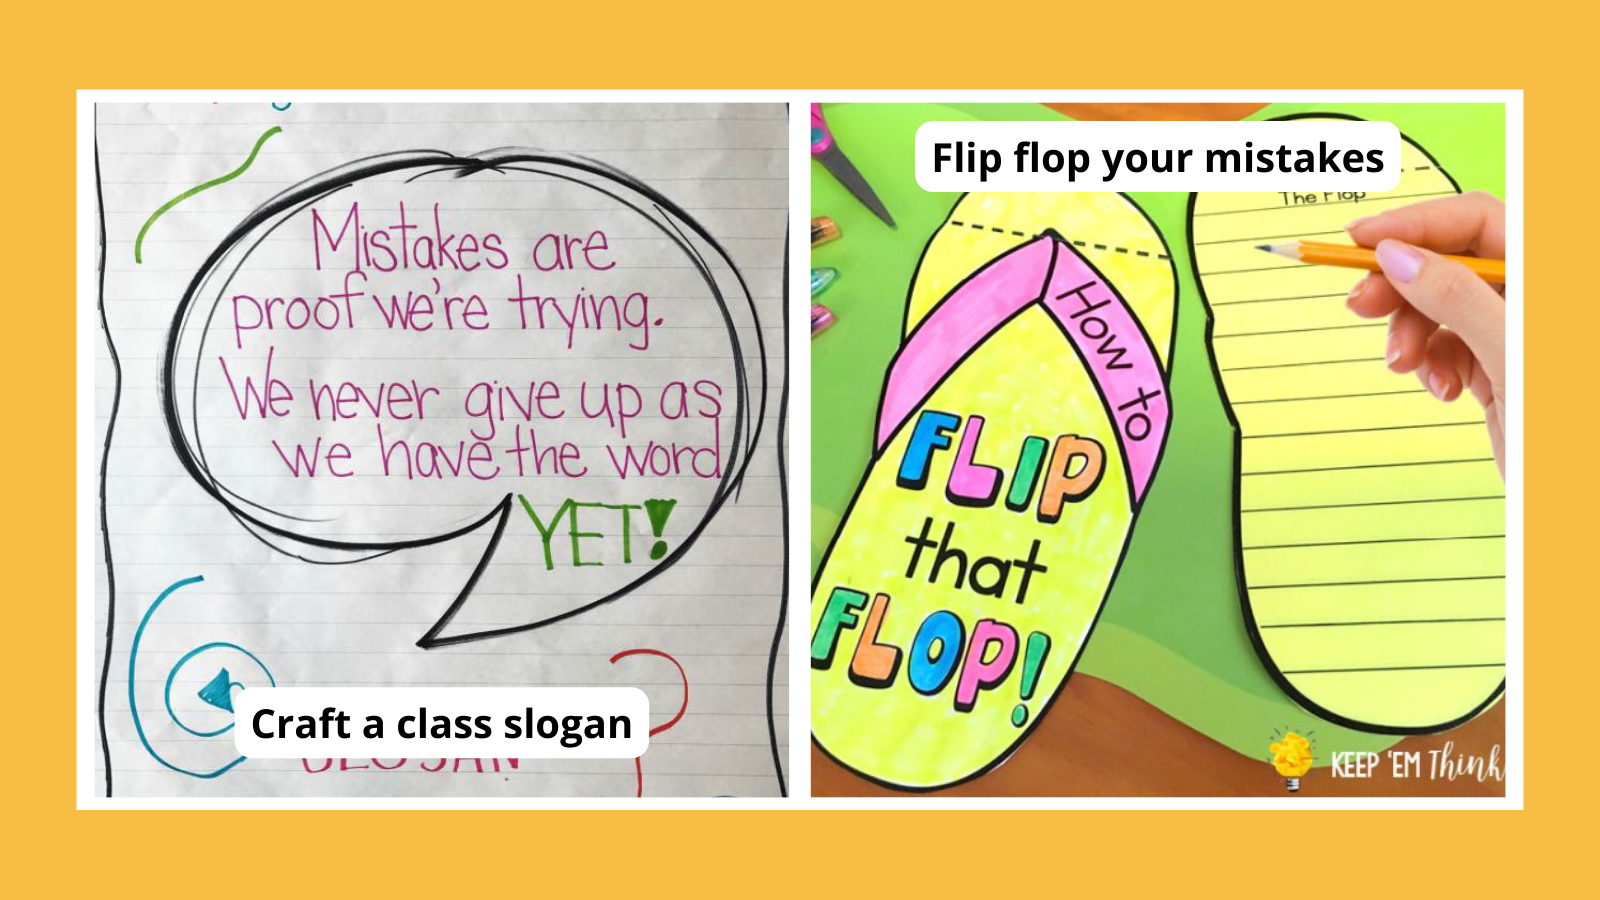 Collage of growth mindset activities including a class slogan and flip flop mistakes